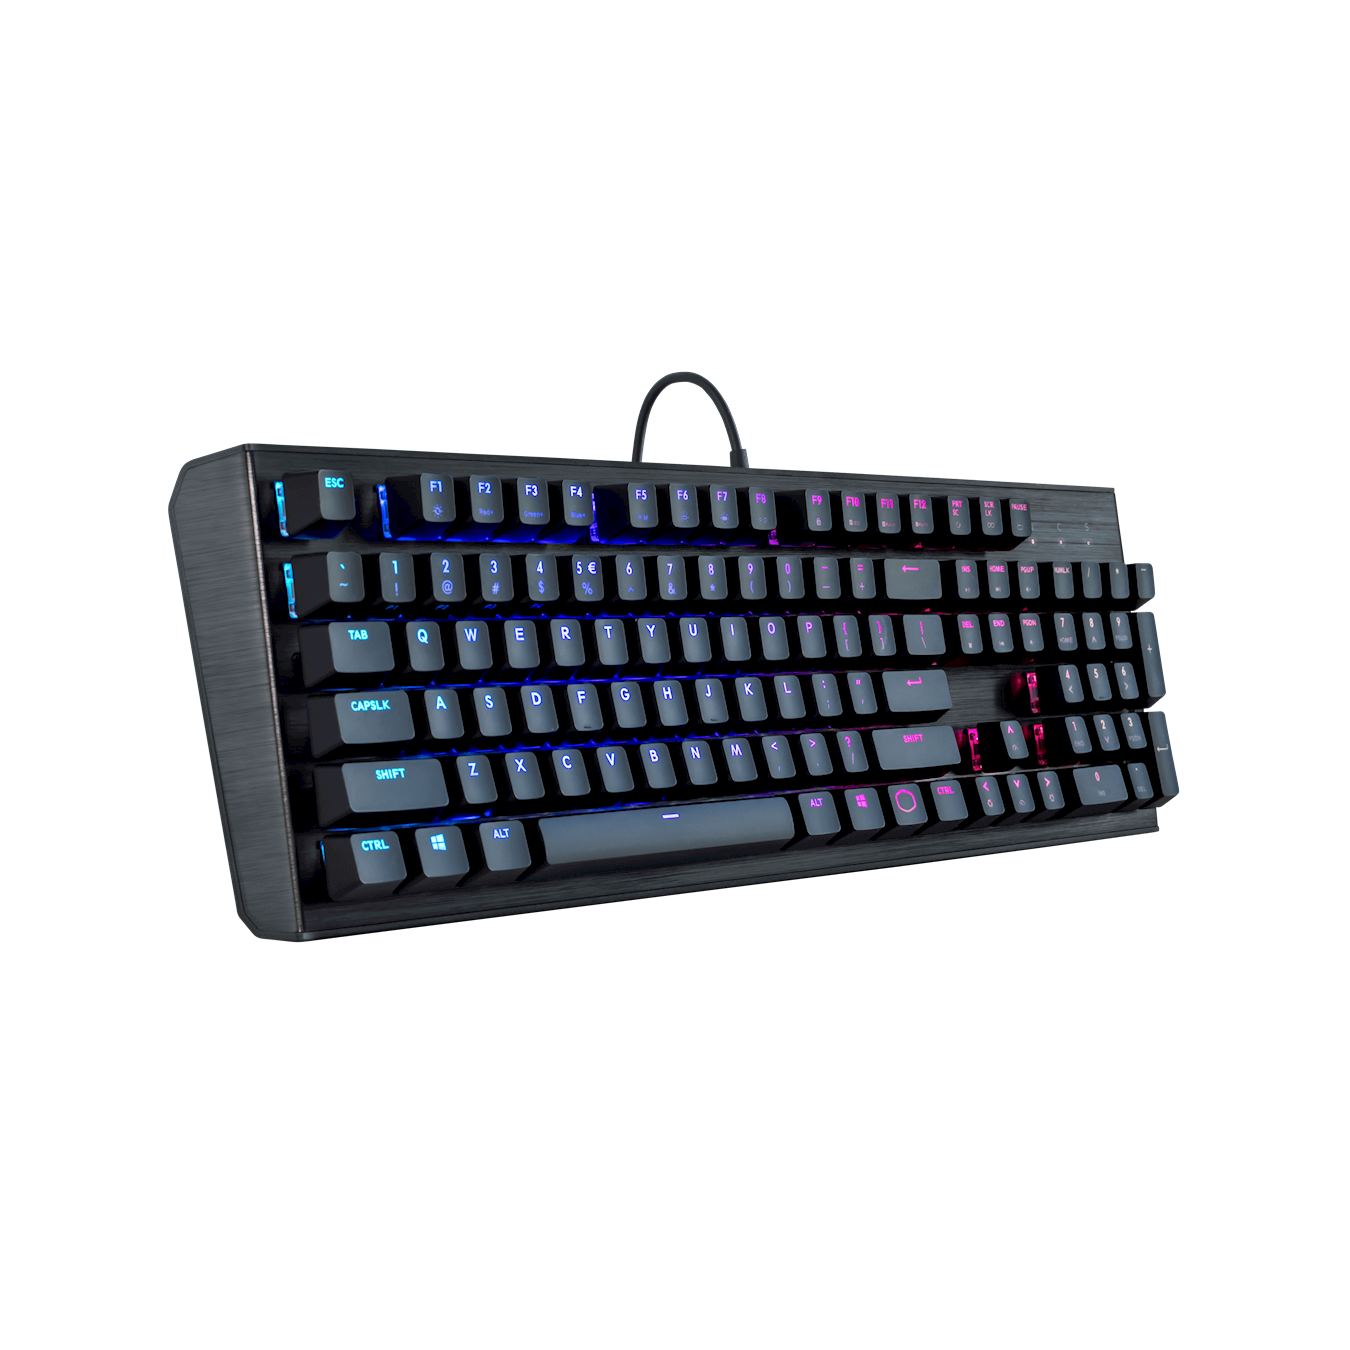 CK552 RGB Mechanical Gaming Keyboard - Curved top plate, floating keycaps, and minimalistic design built with functionality in mind